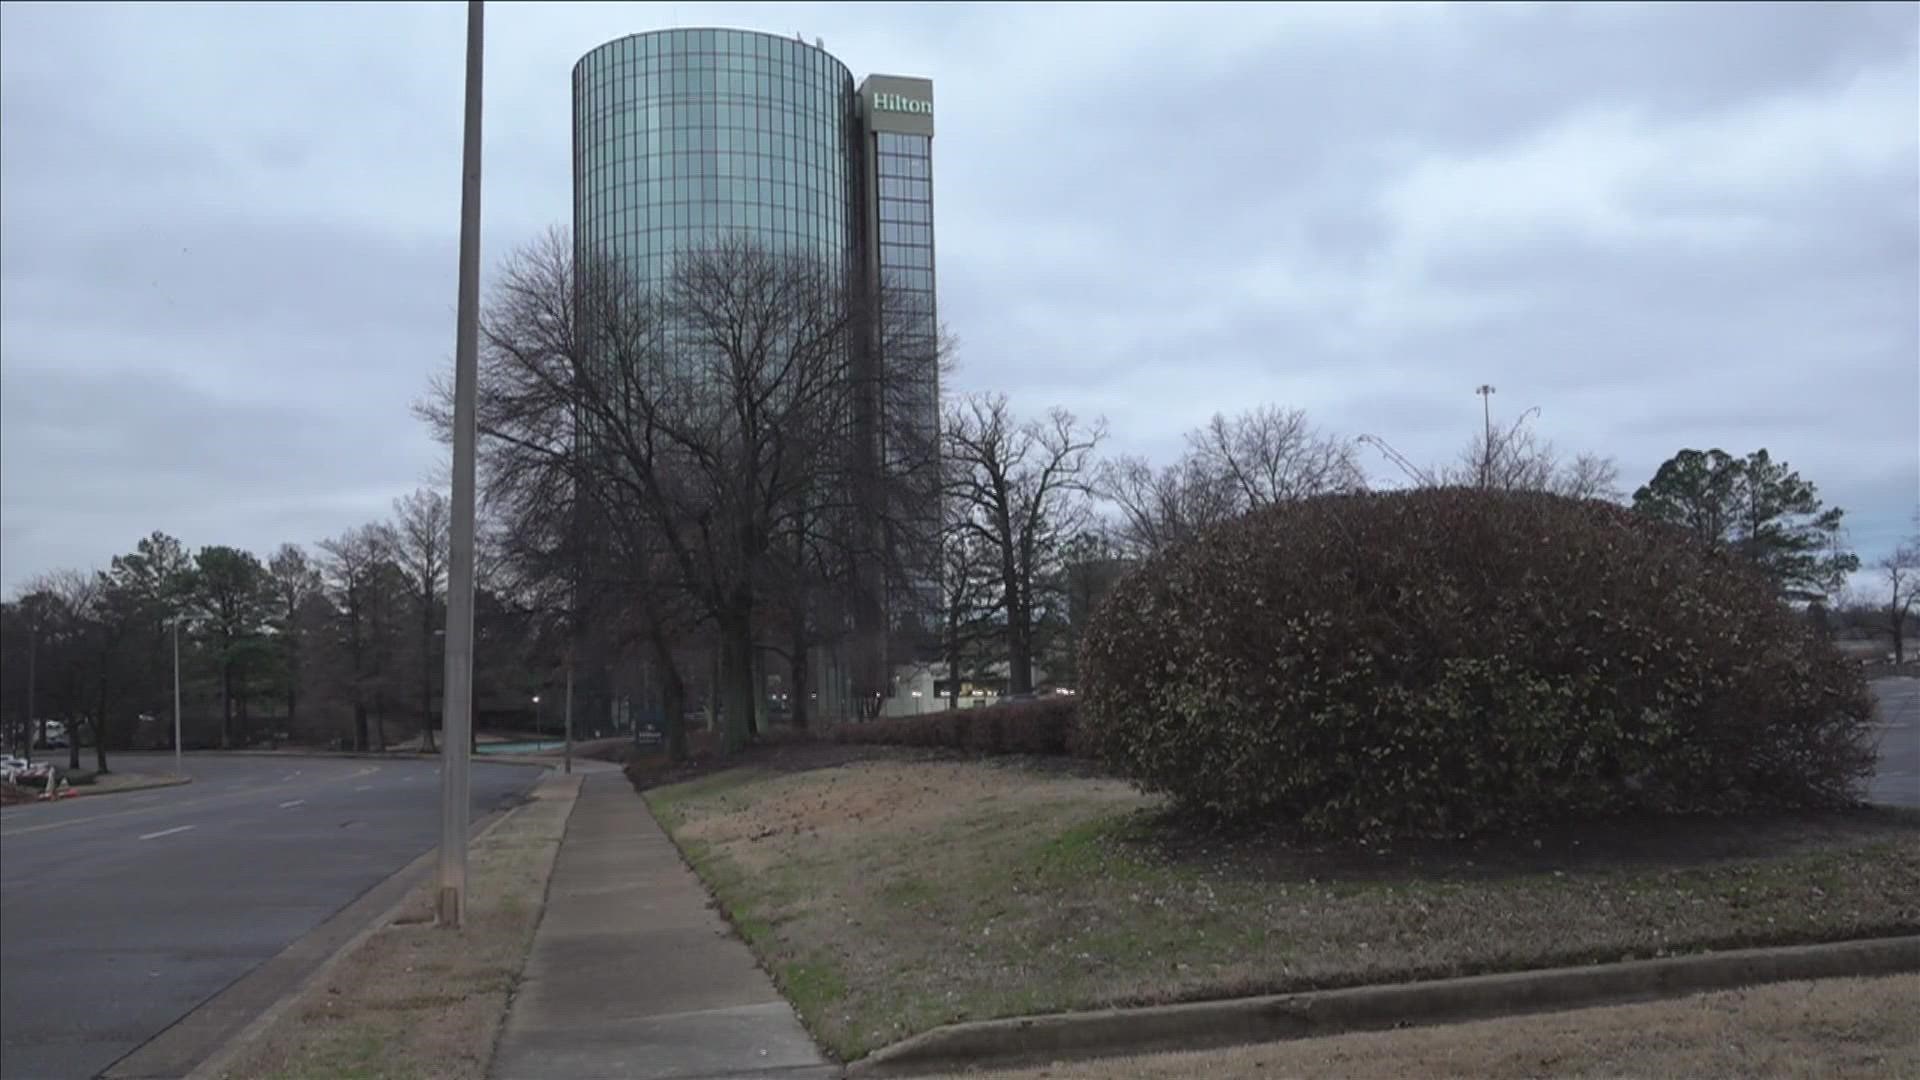 Memphis Police said the incident happened Wednesday at the Hilton Hotel near Poplar Avenue and I-240 in East Memphis.